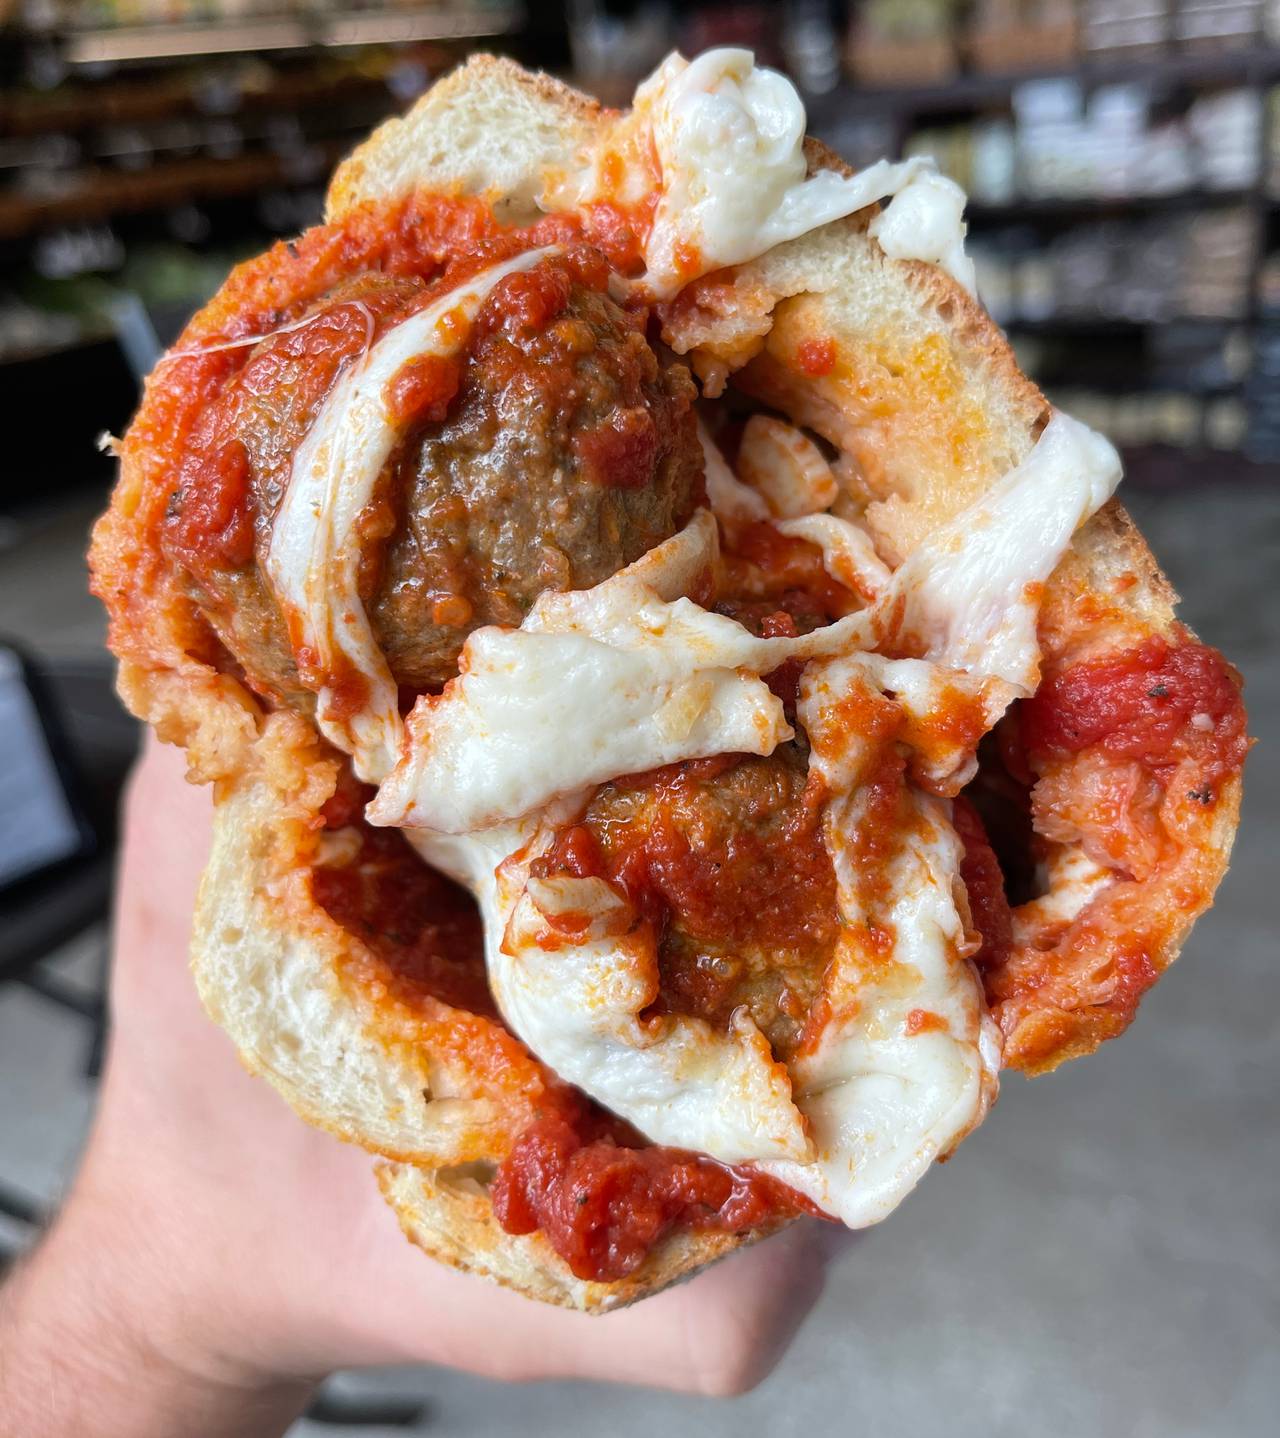 A meatball sub from DiPasquale's.